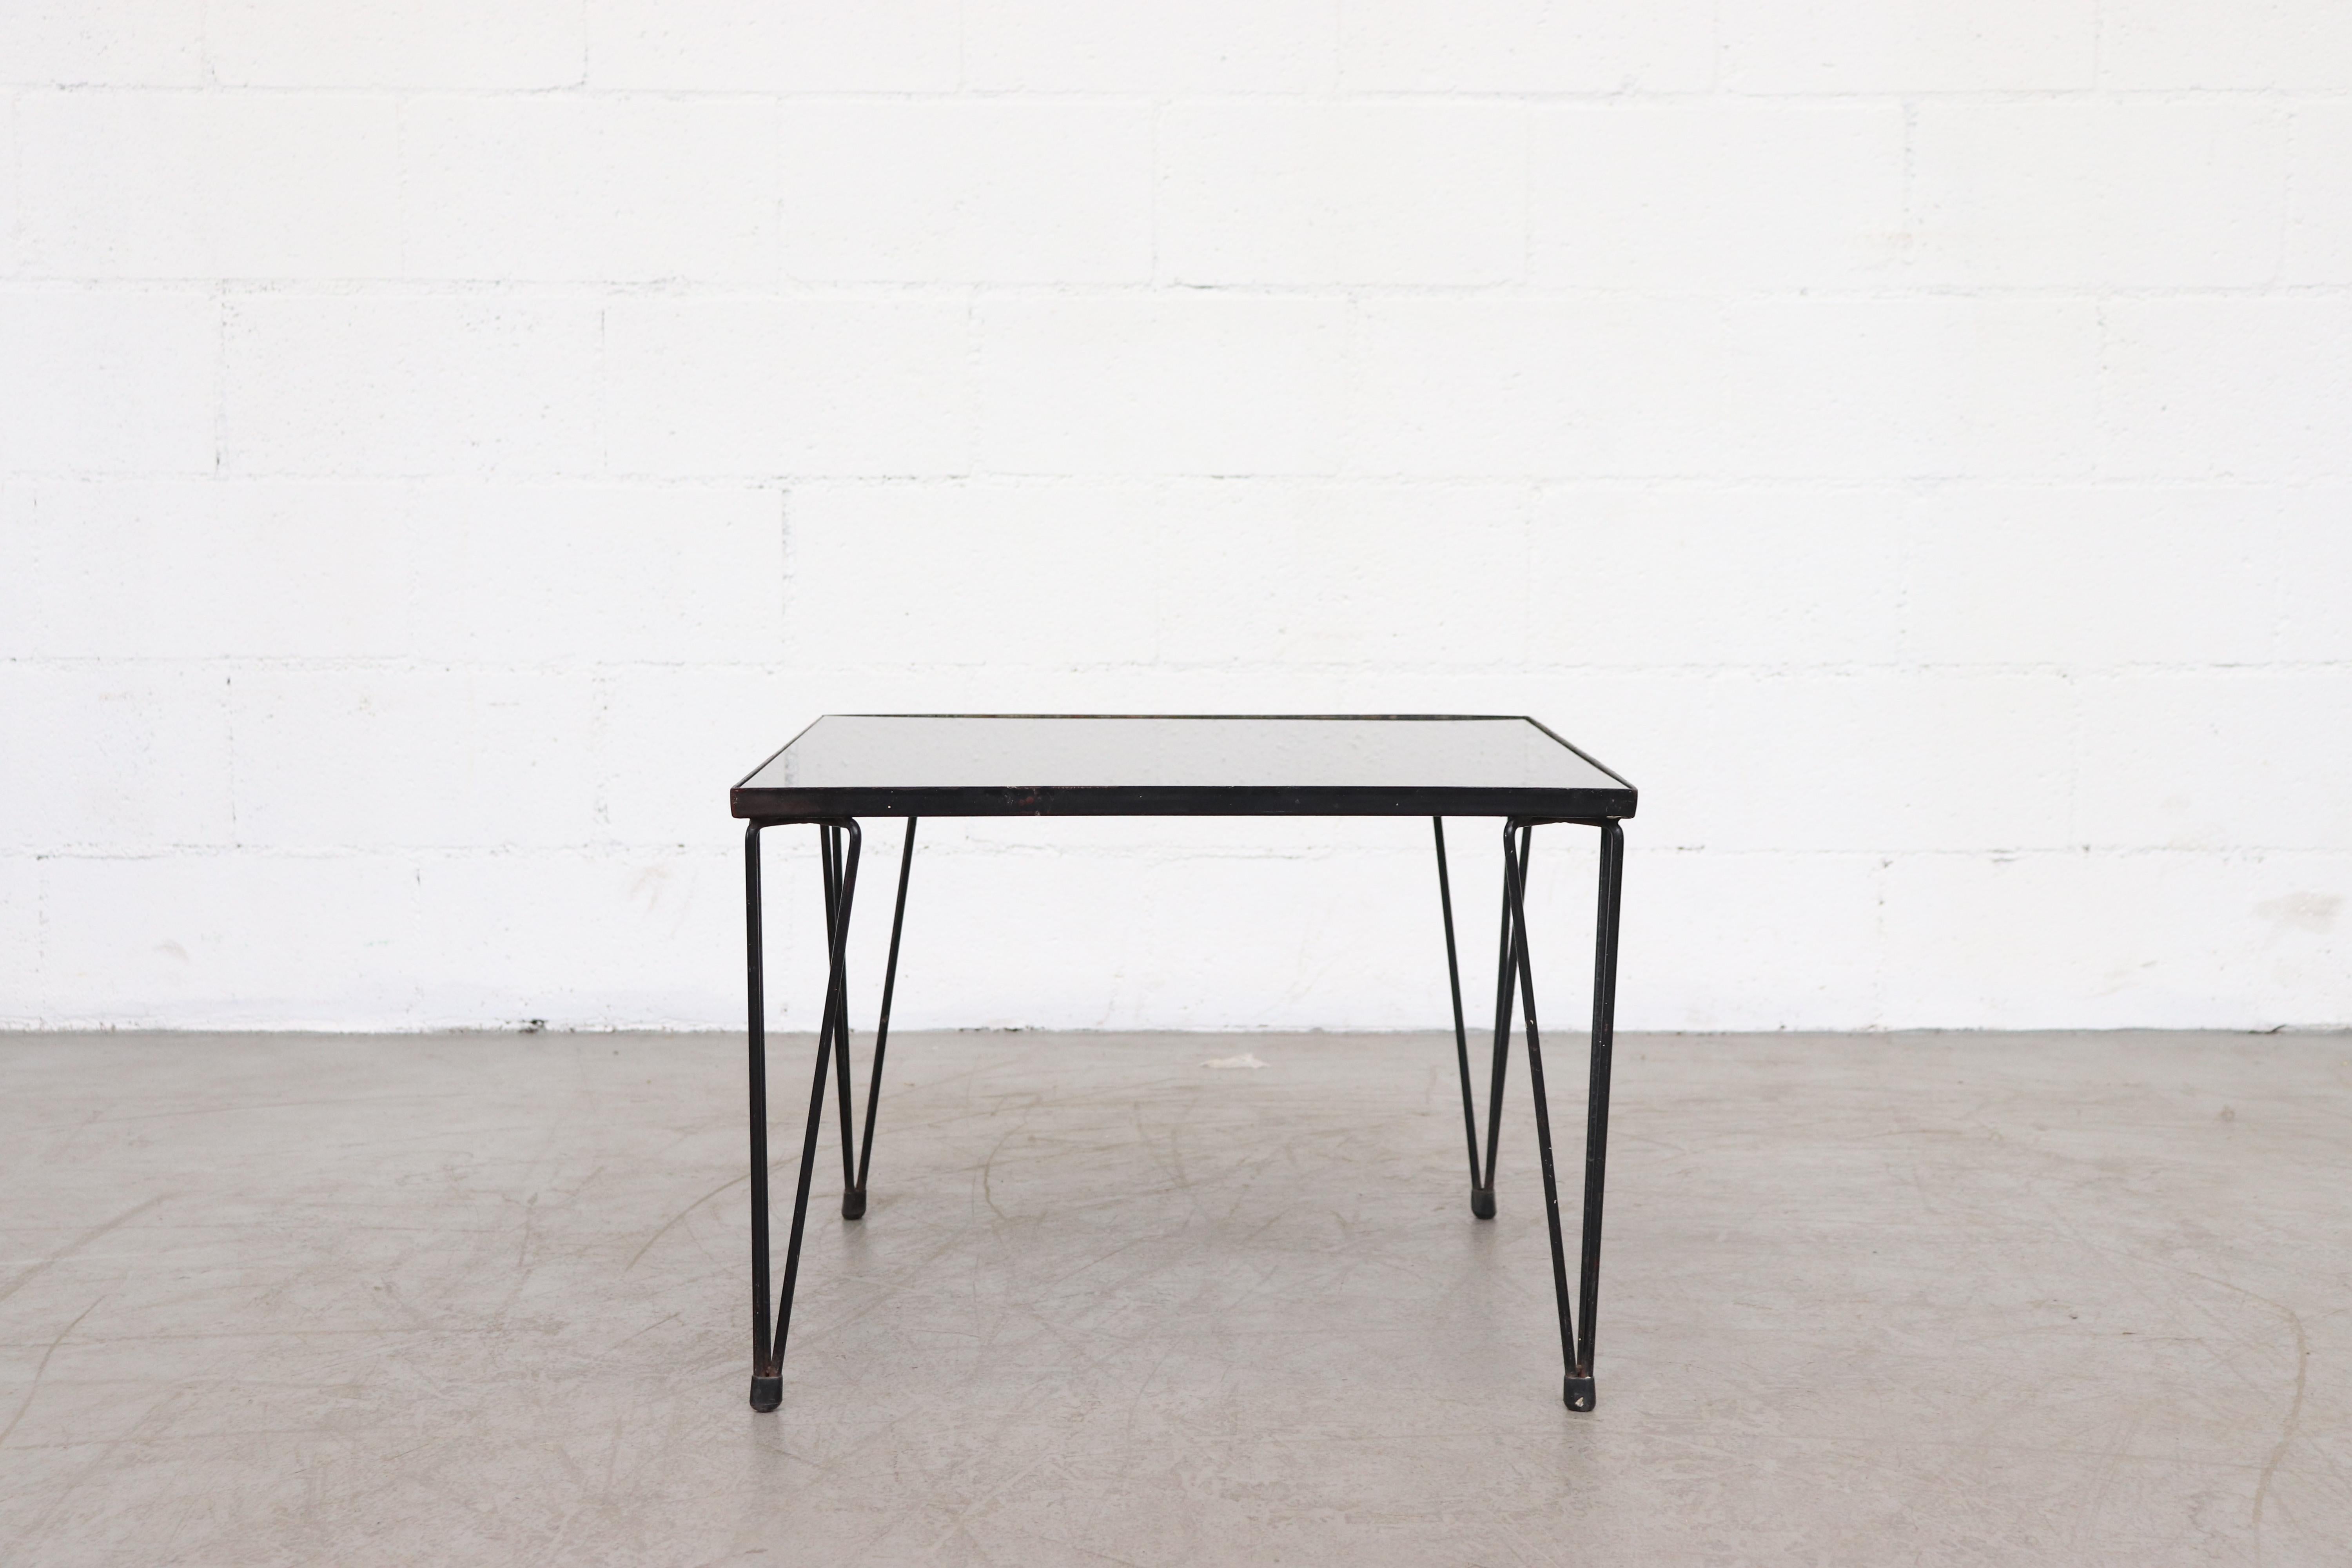 Mid-century, black glass coffee table with adorable enameled metal hairpin legs. The table brings to mind those created by Dutch designer Arnold Bueno de Mesquita for manufacturers Groos and Spur (both based in The Netherlands) during the 1950s and